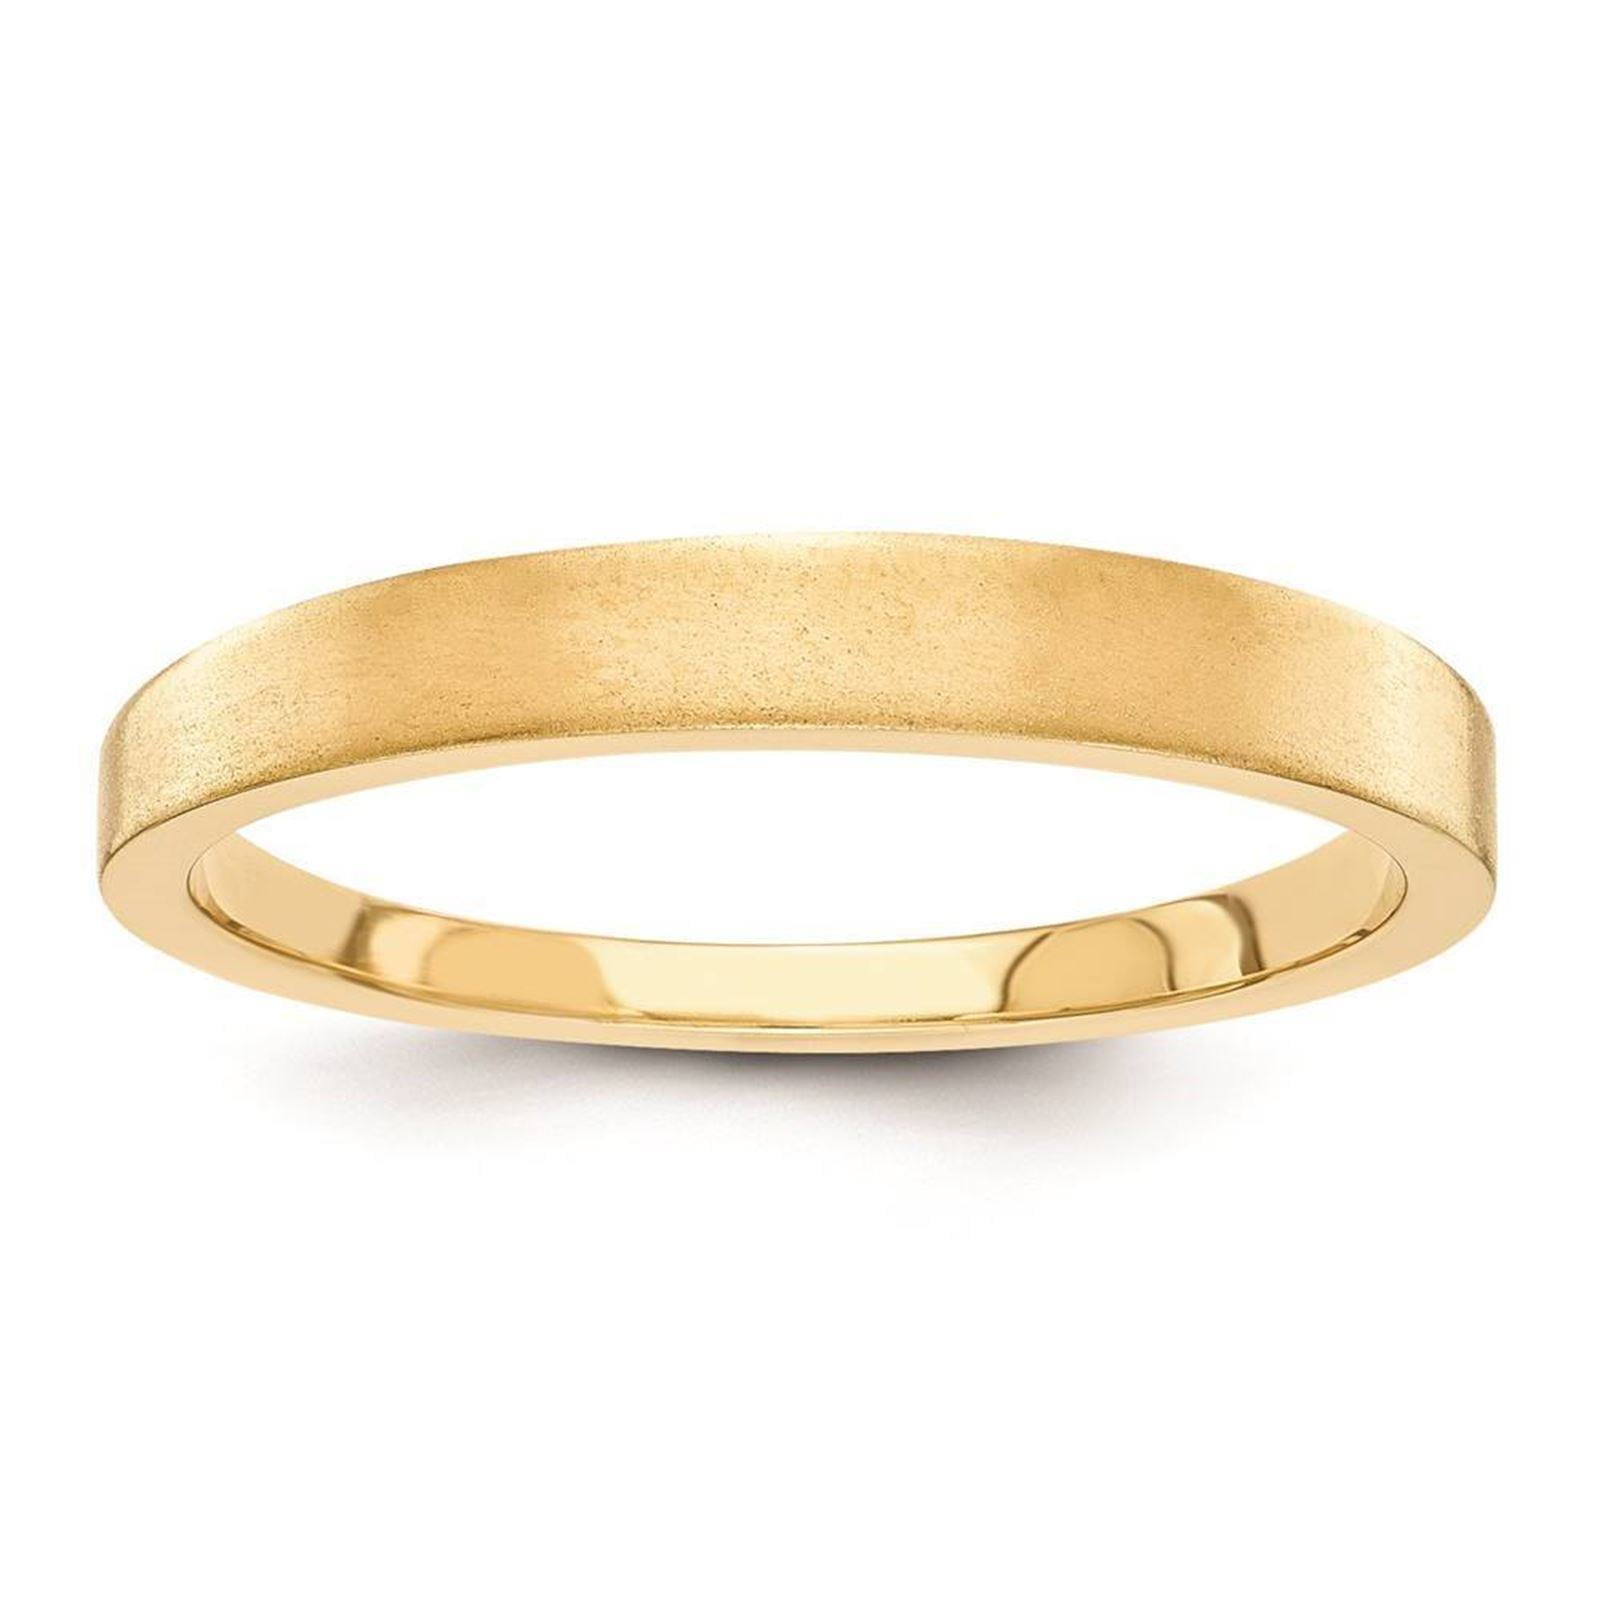 Fusion Collections - 14K Yellow Gold 3mm Tapered Flat Edge Satin Finish